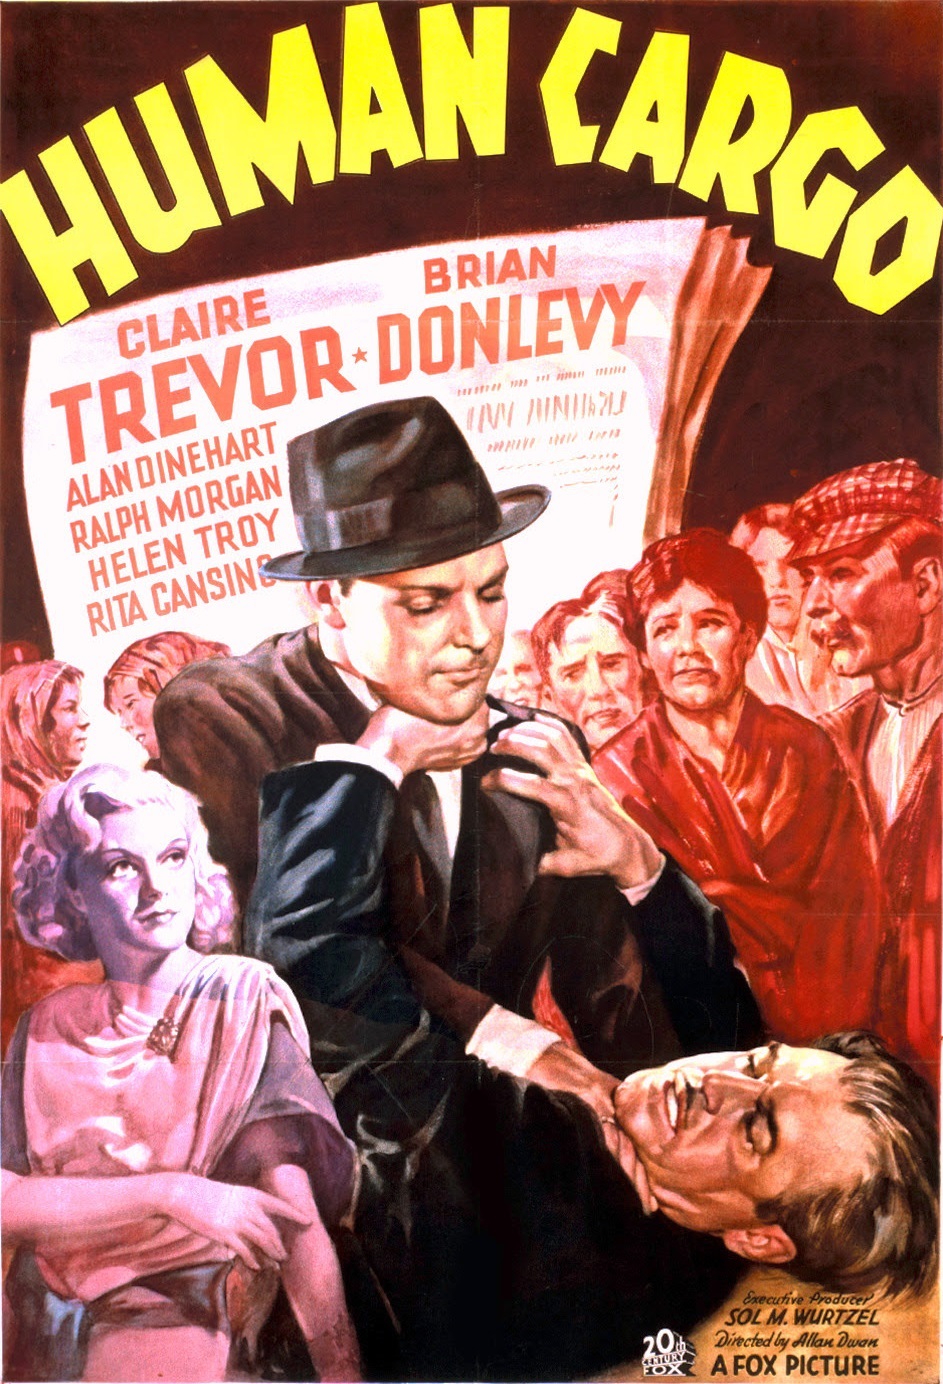 Human Cargo (1936) starring Claire Trevor on DVD on DVD